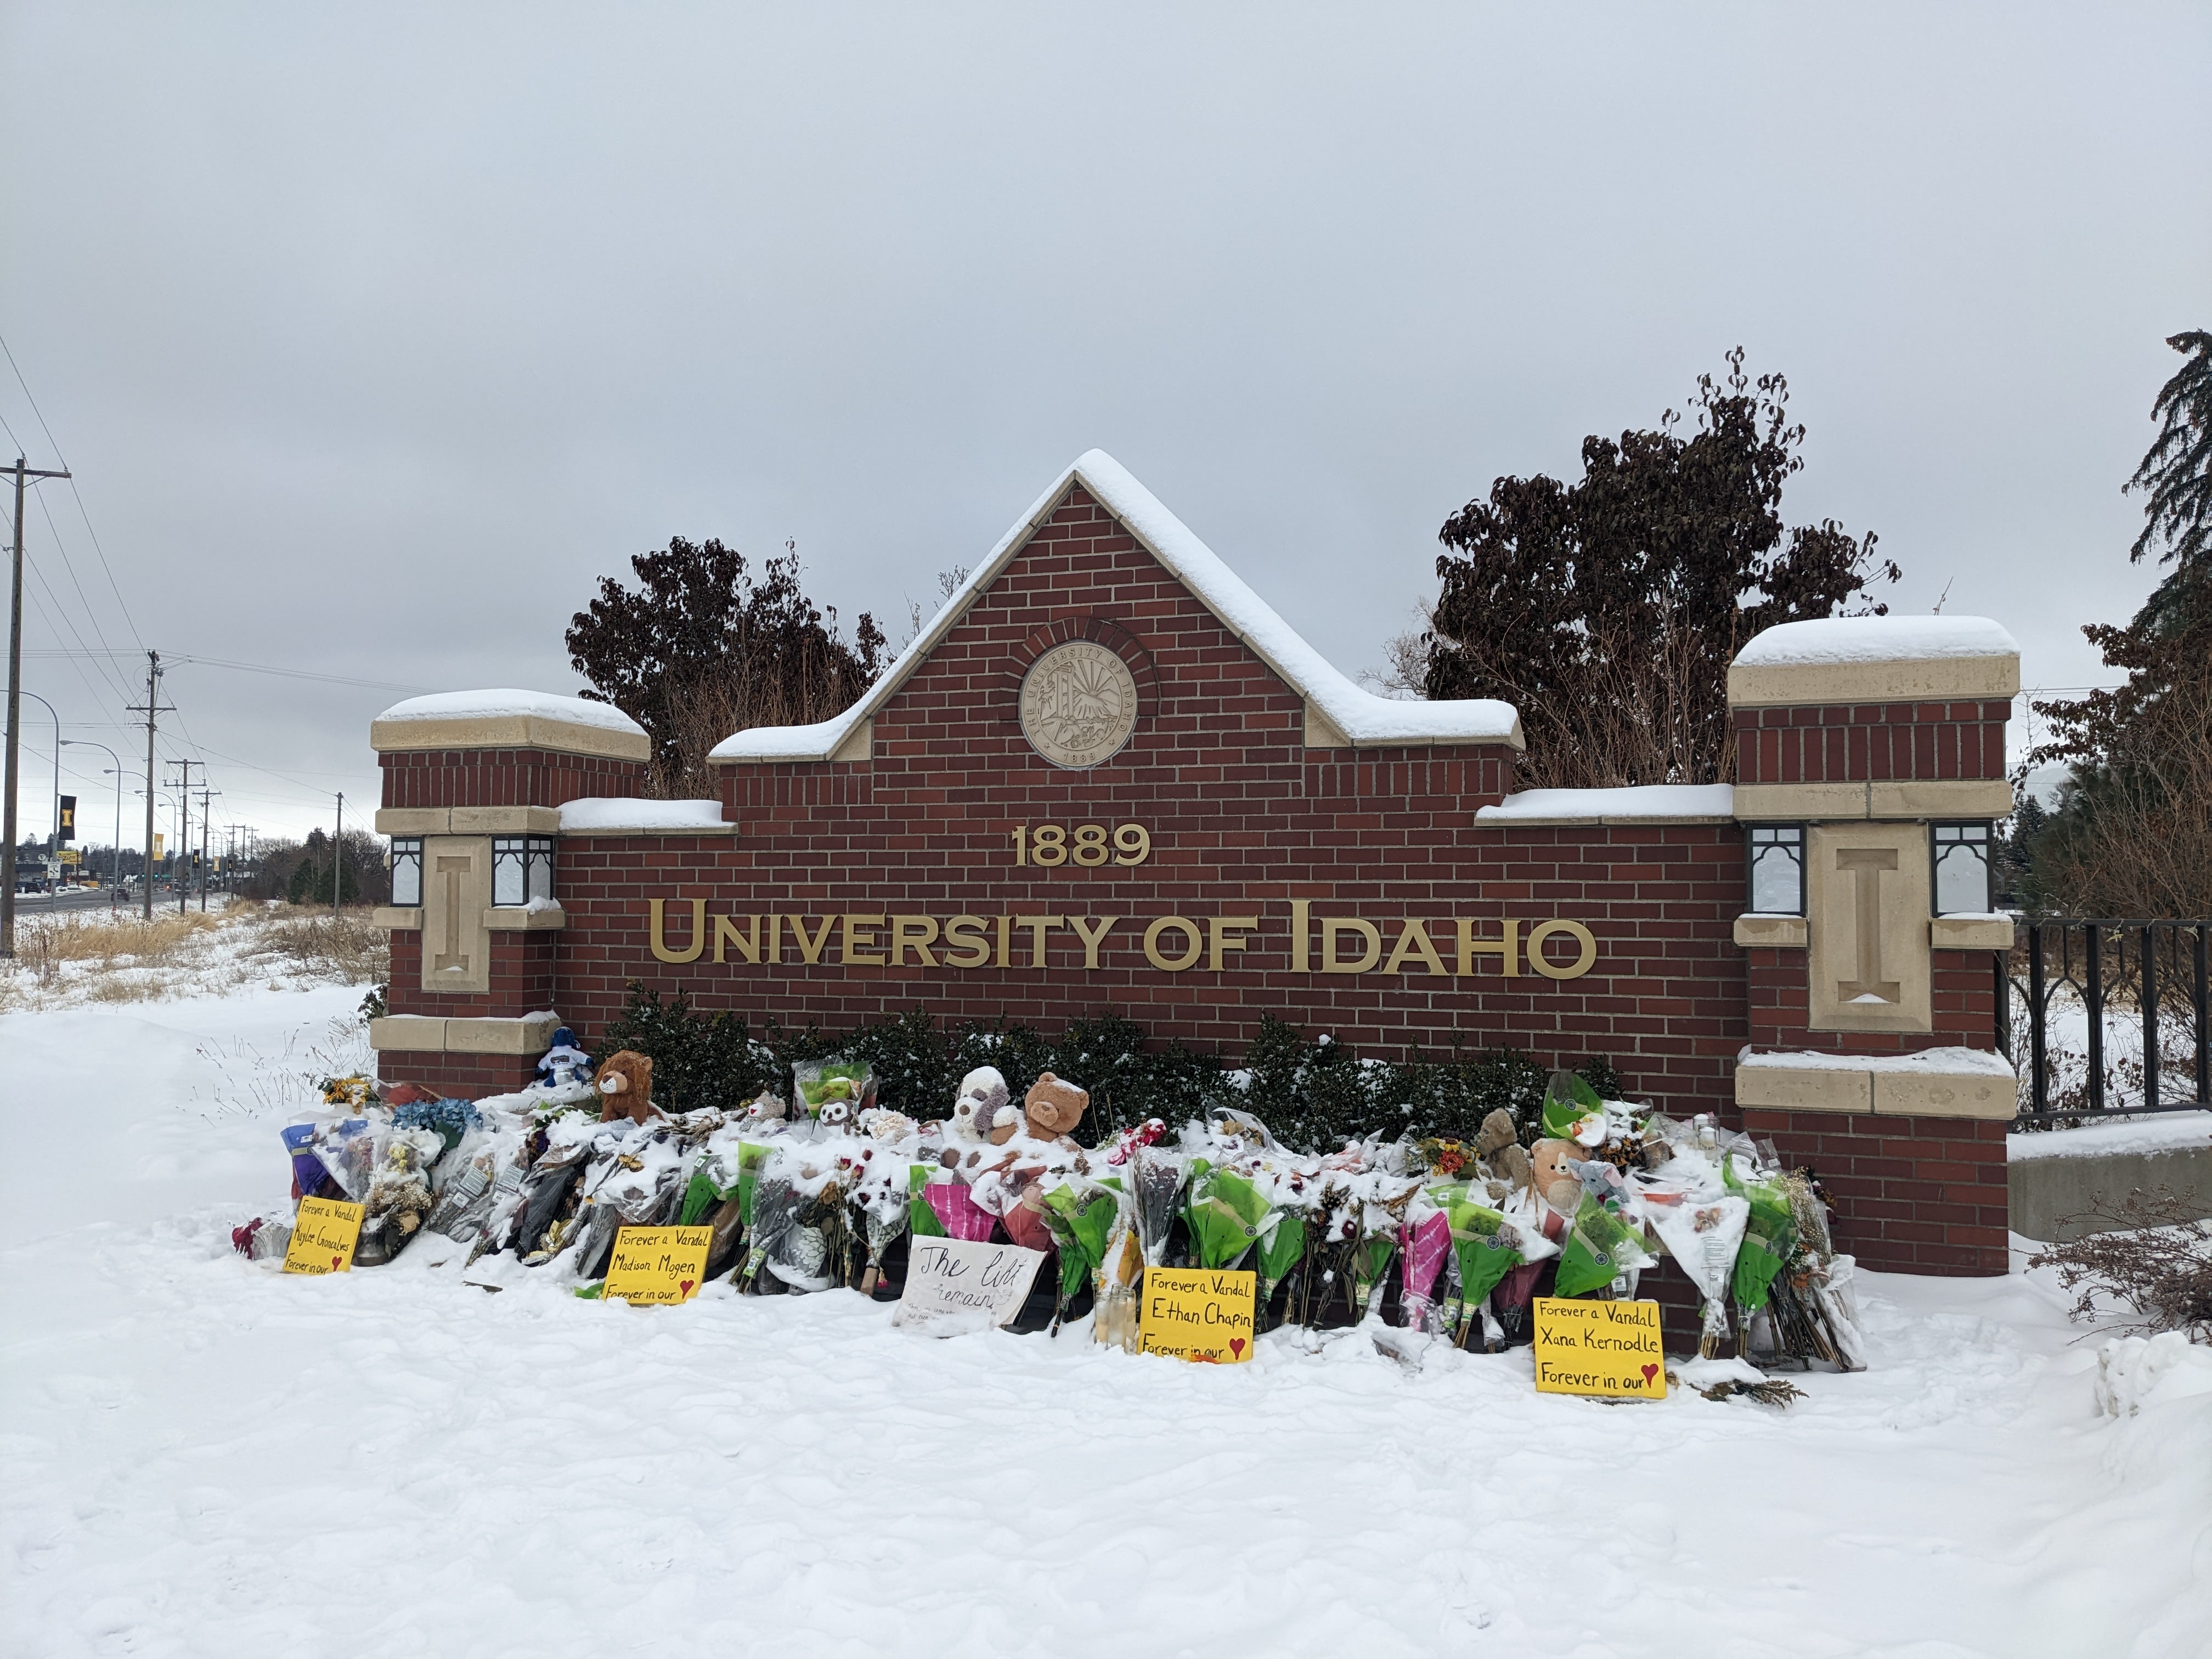 Flowers and signs are piled up on a University of Idaho sign with white snow all around the brick sign.